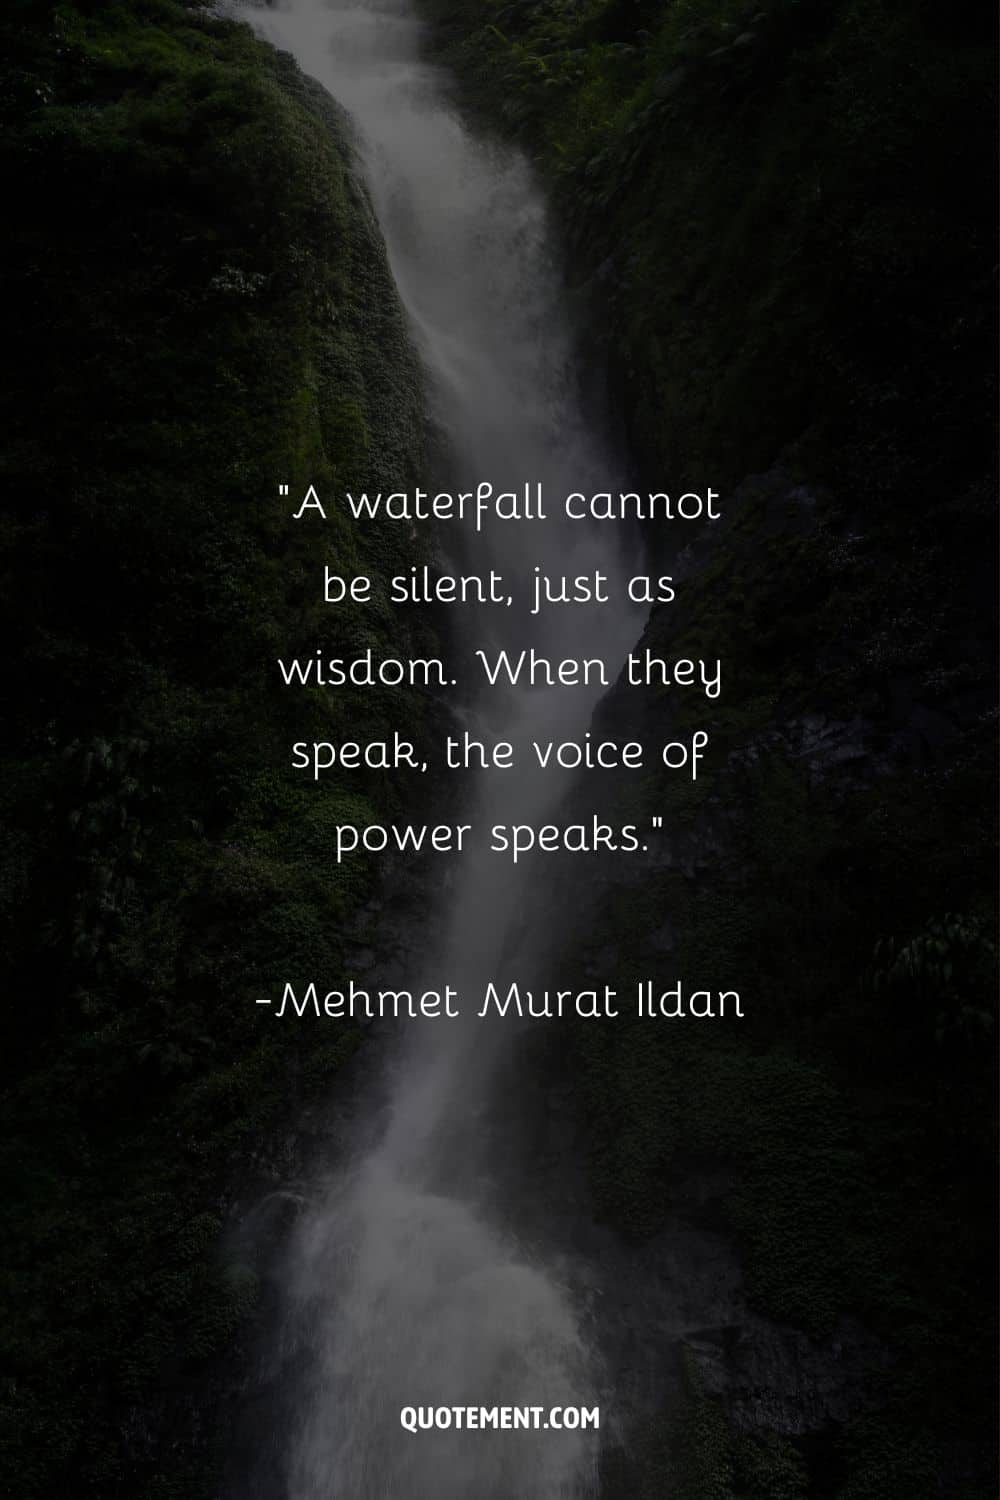 Powerful quote on waterfalls by M.M. Ildan and a waterfall in the background, too
